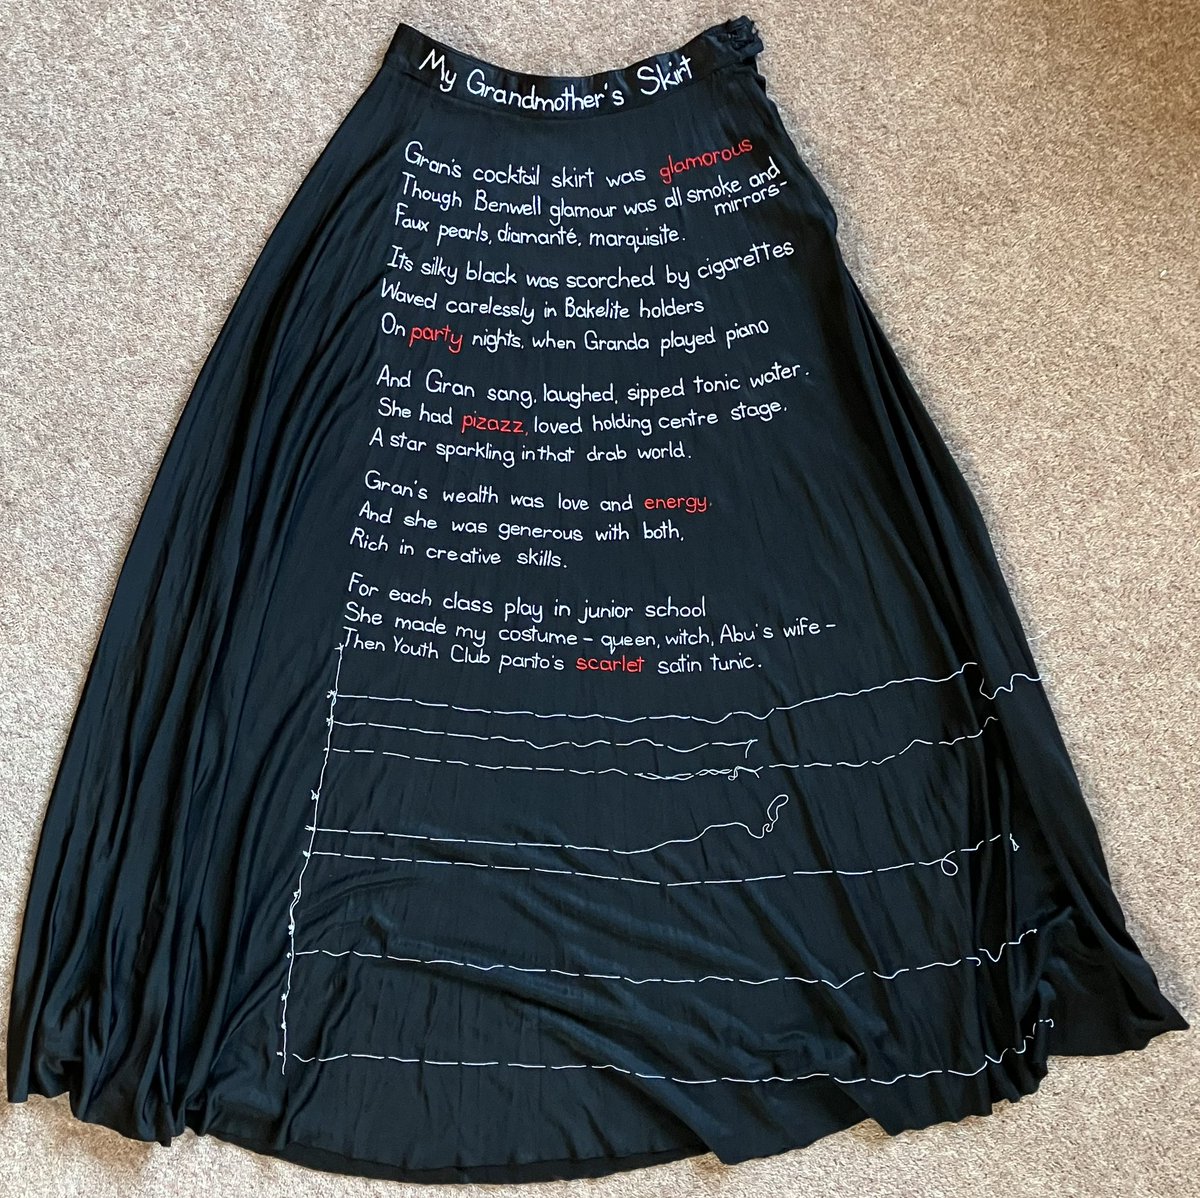 Stanza five (of nine) is stitched, with the focus now on my Gran’s formidable dress-making skills. I think she loved creating my costumes as much as I loved performing in them. I still have the scarlet satin Principal Boy’s tunic I wore in ‘Puss in Boots’.